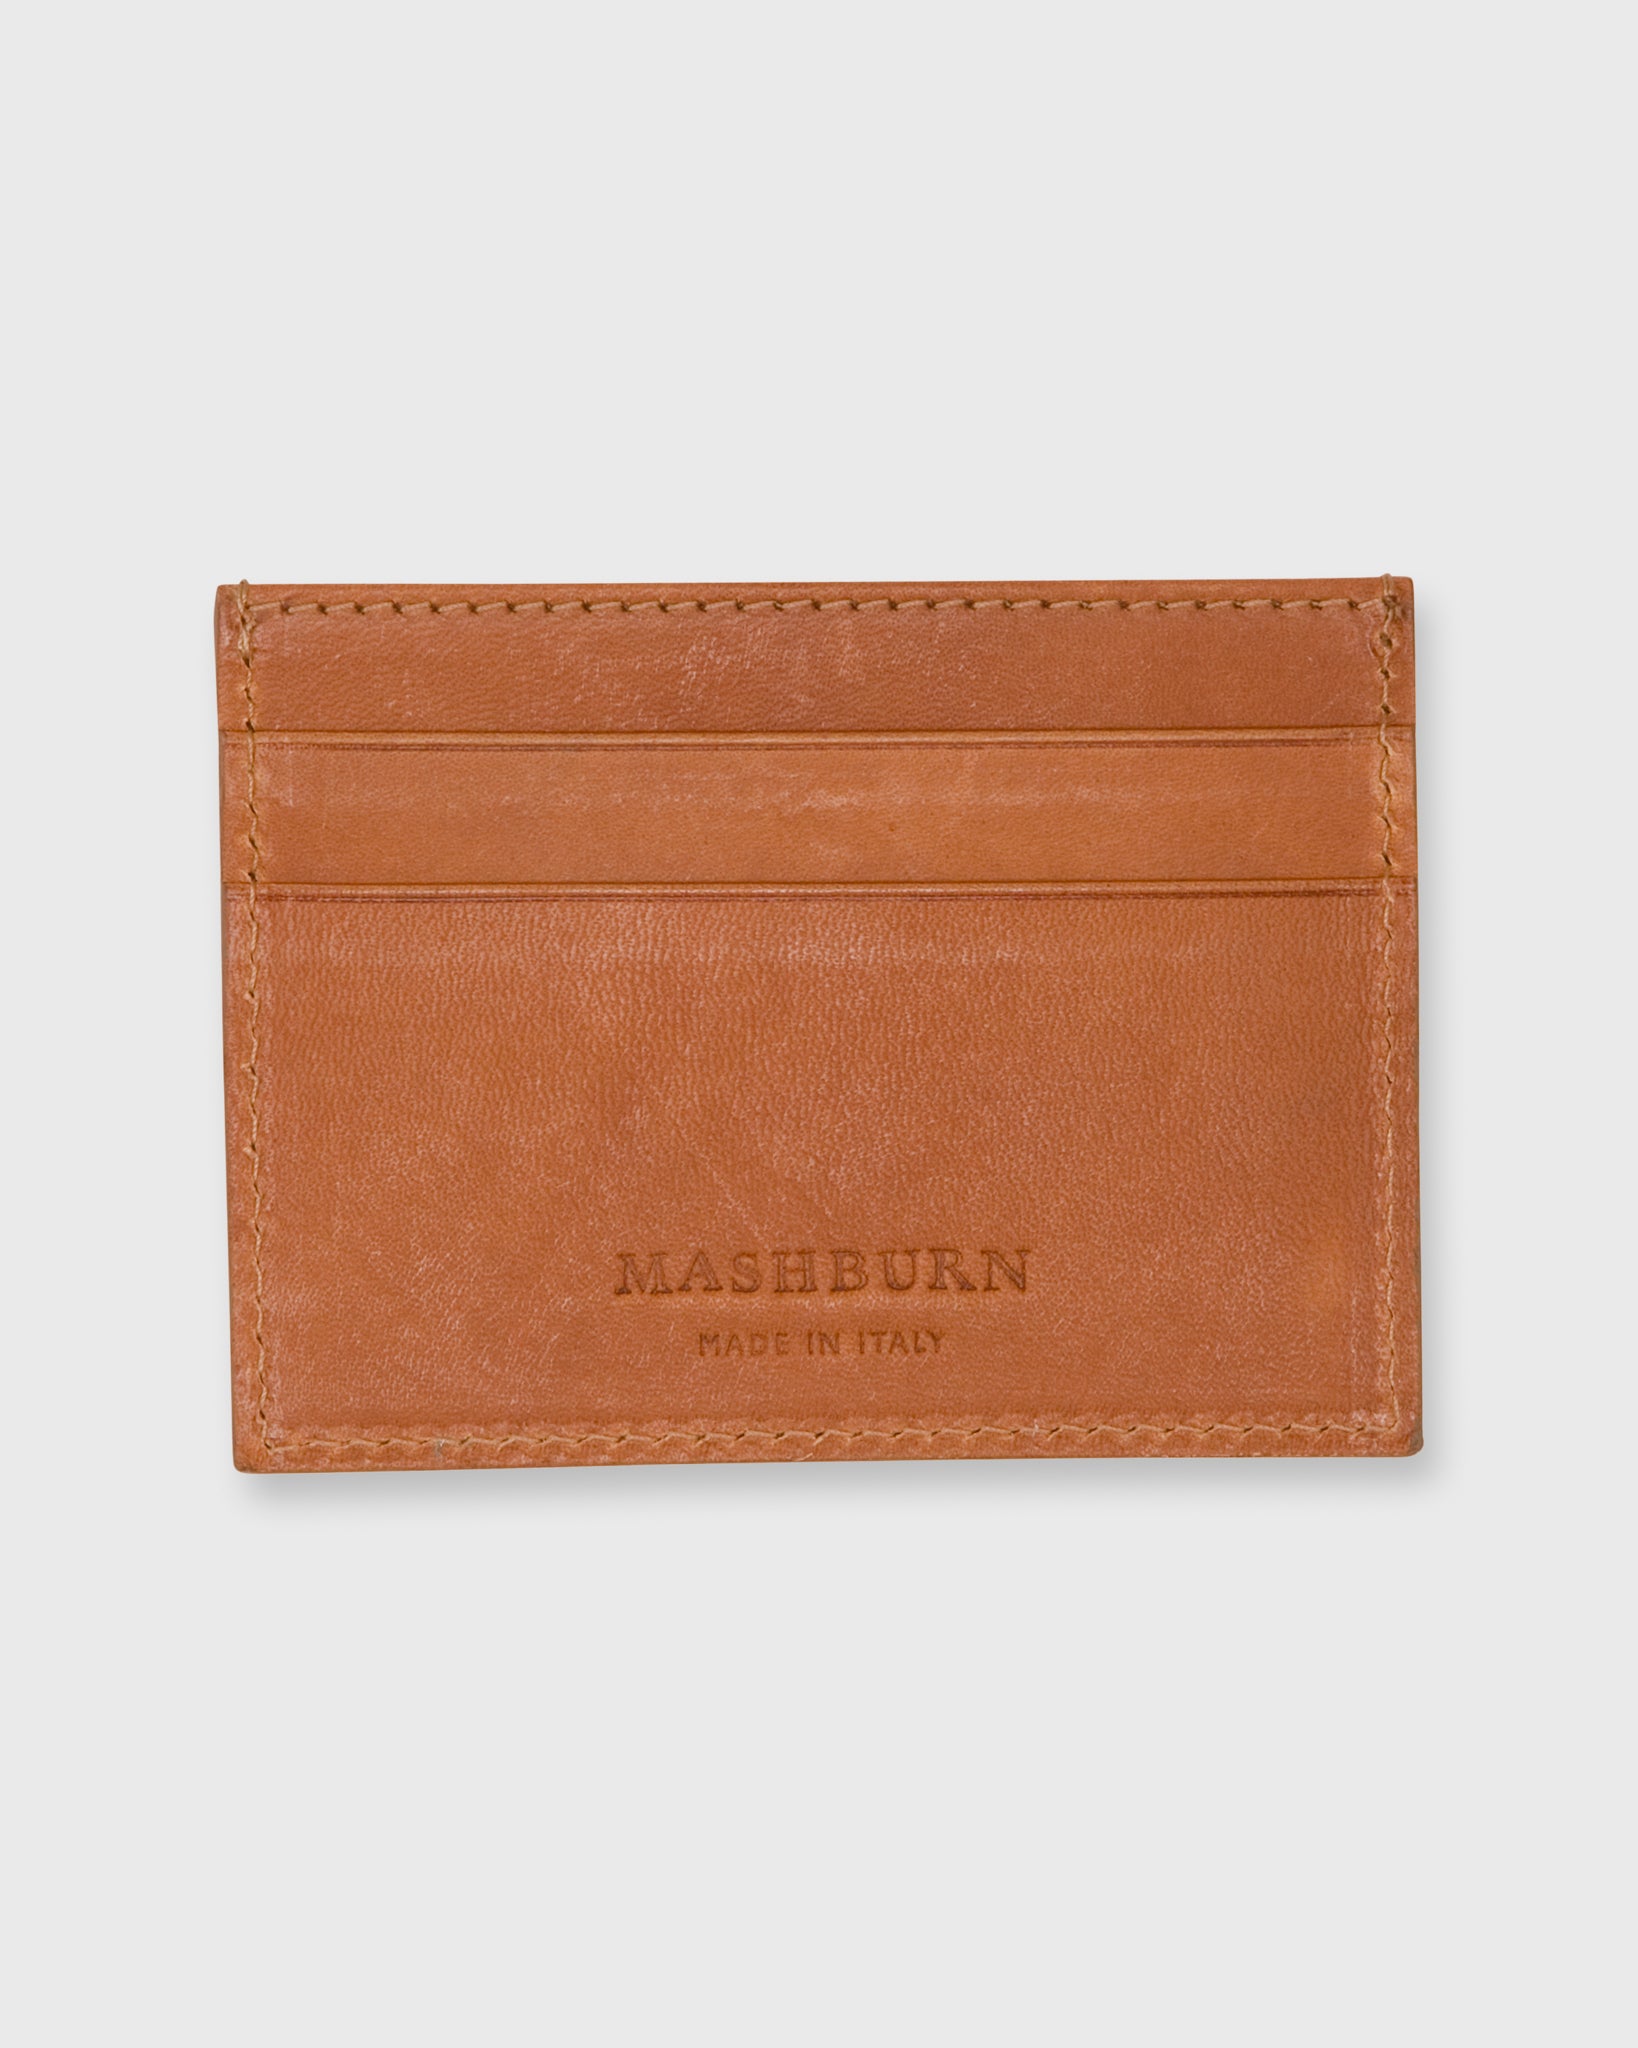 Card Holder in Tan Leather